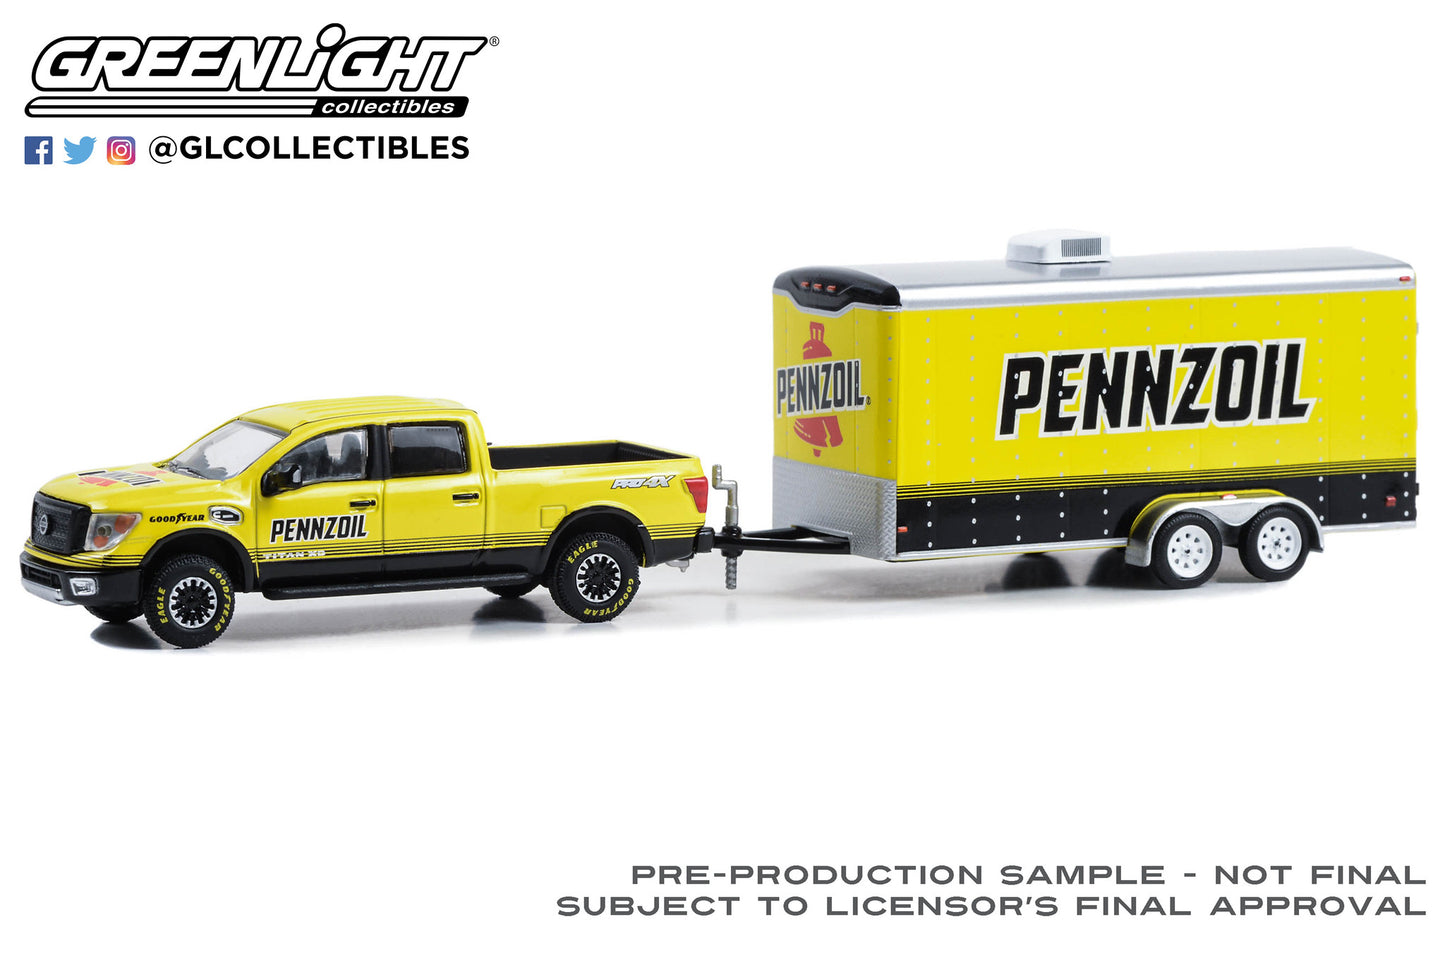 GreenLight 1:64 Hitch & Tow Series 30 - 2018 Nissan Titan XD Pro-4X with Enclosed Car Hauler – Pennzoil 32300-D